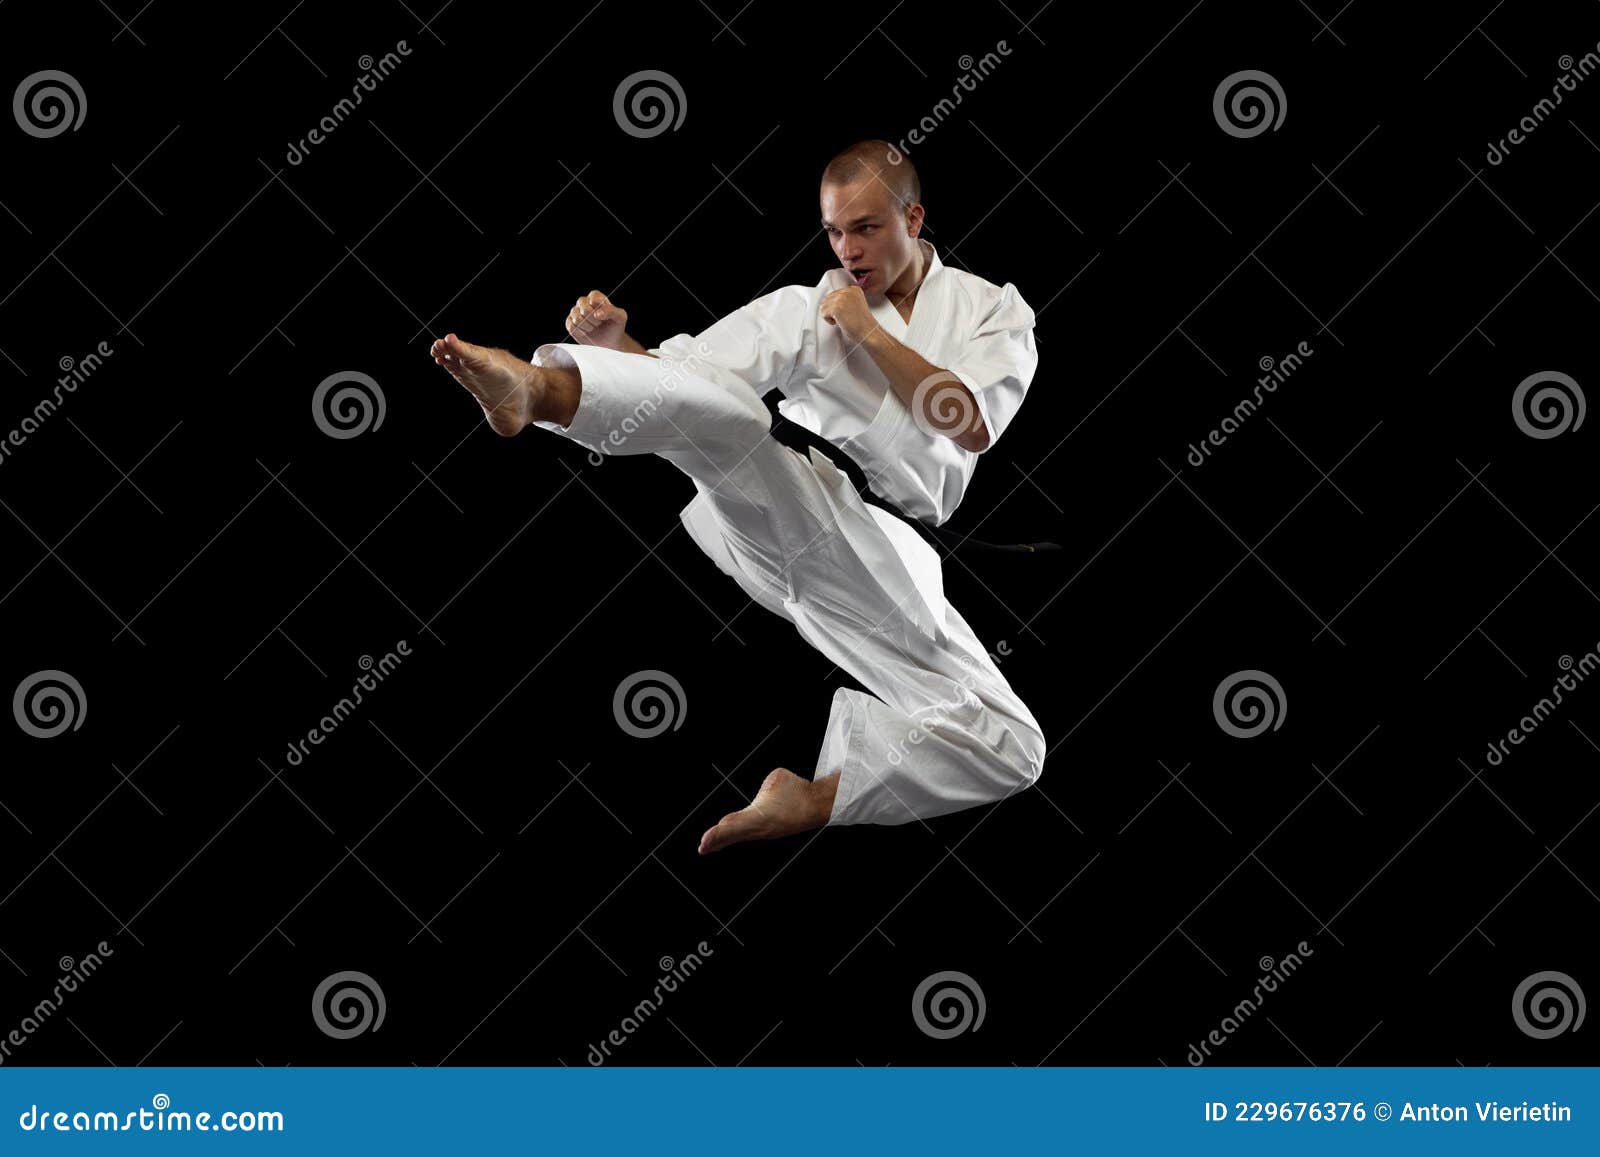 Full-length Portrait. One Young Karate Sportsman Training Isolated Over  Black Background Stock Photo - Image of hand, battle: 229676376